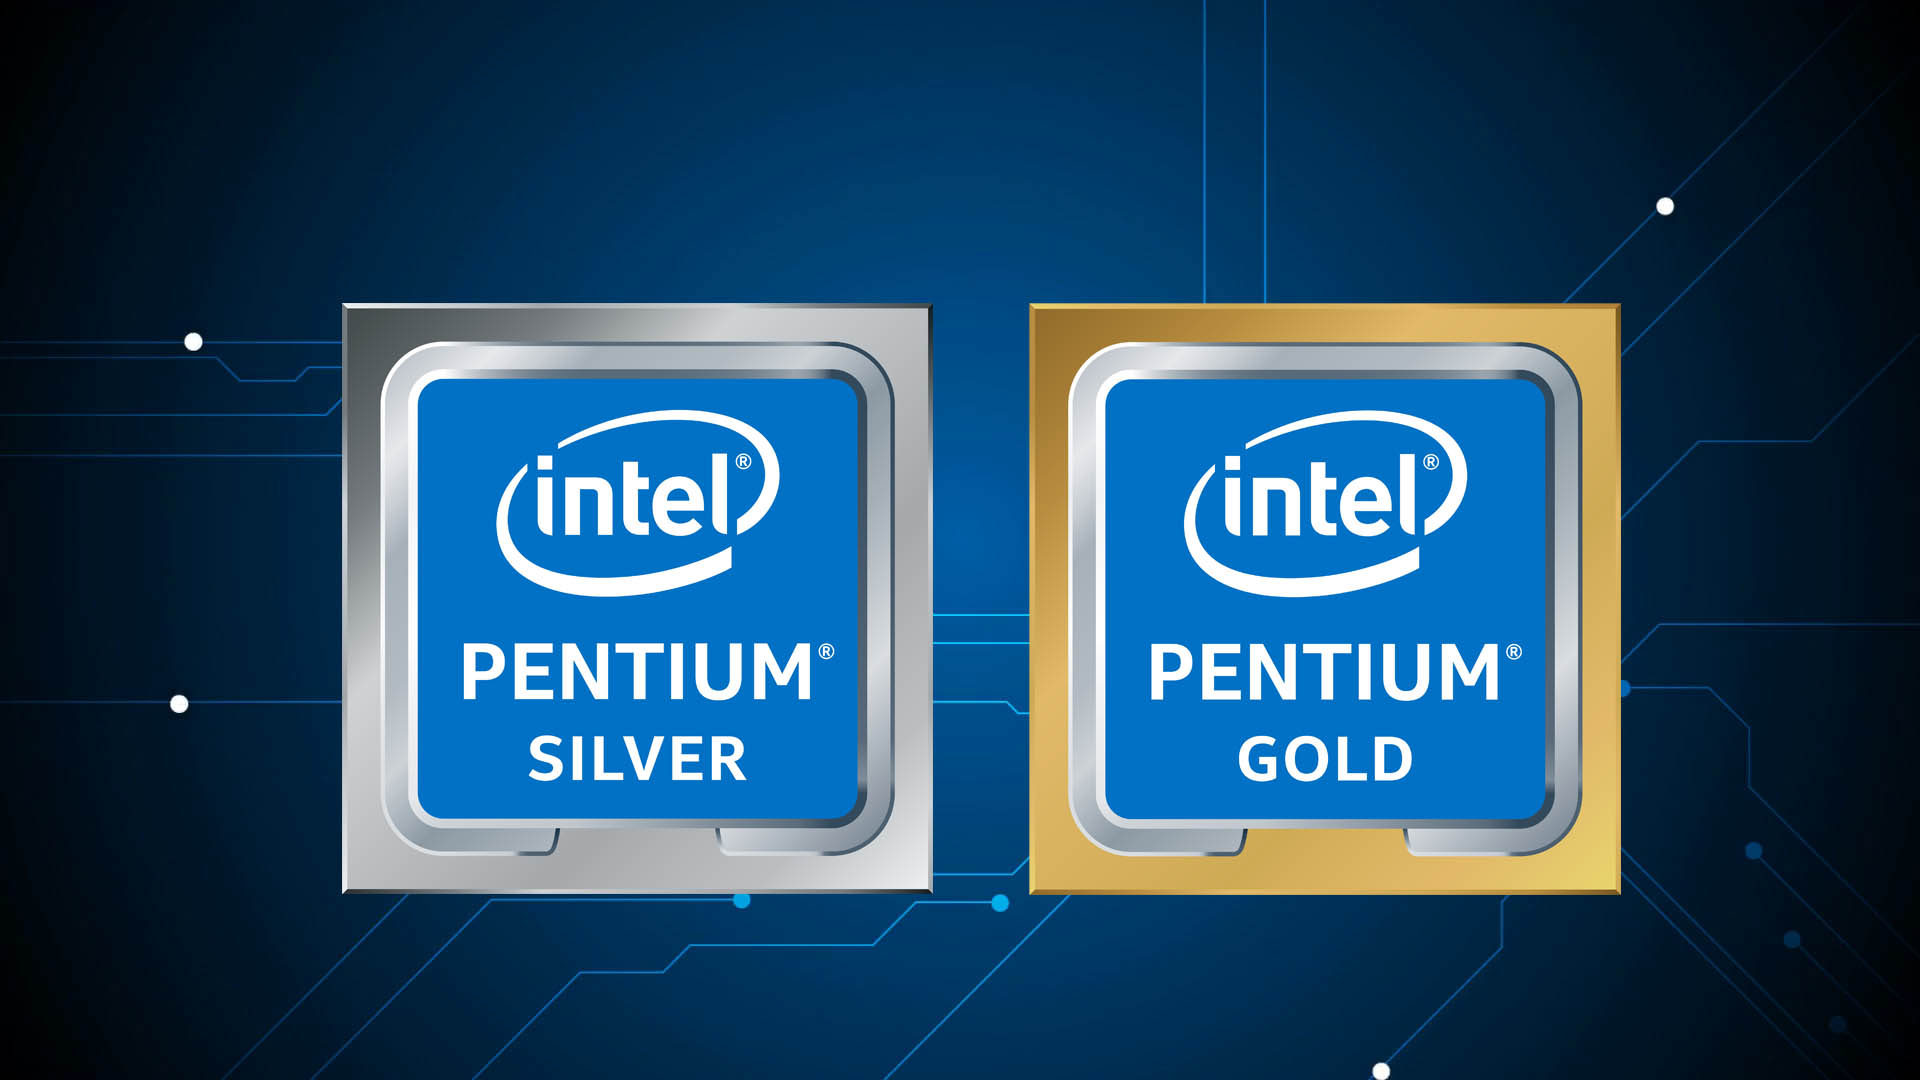 Intel Performance and Connectivity at Amazing Value